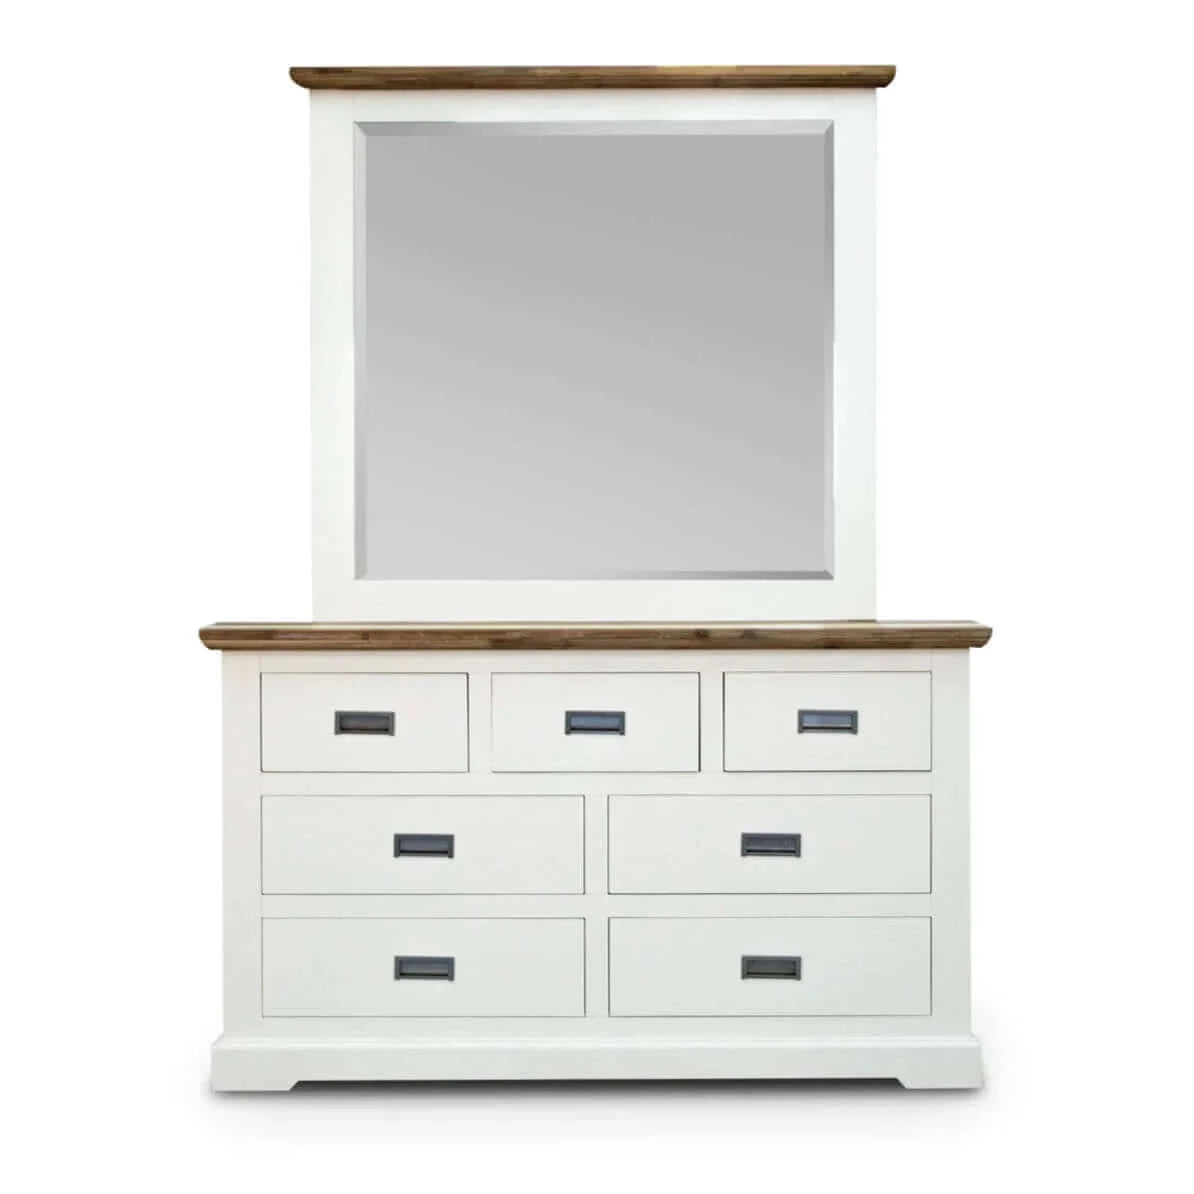 Buy orville dresser mirror 7 chest of drawers tallboy storage cabinet - multi color - upinteriors-Upinteriors